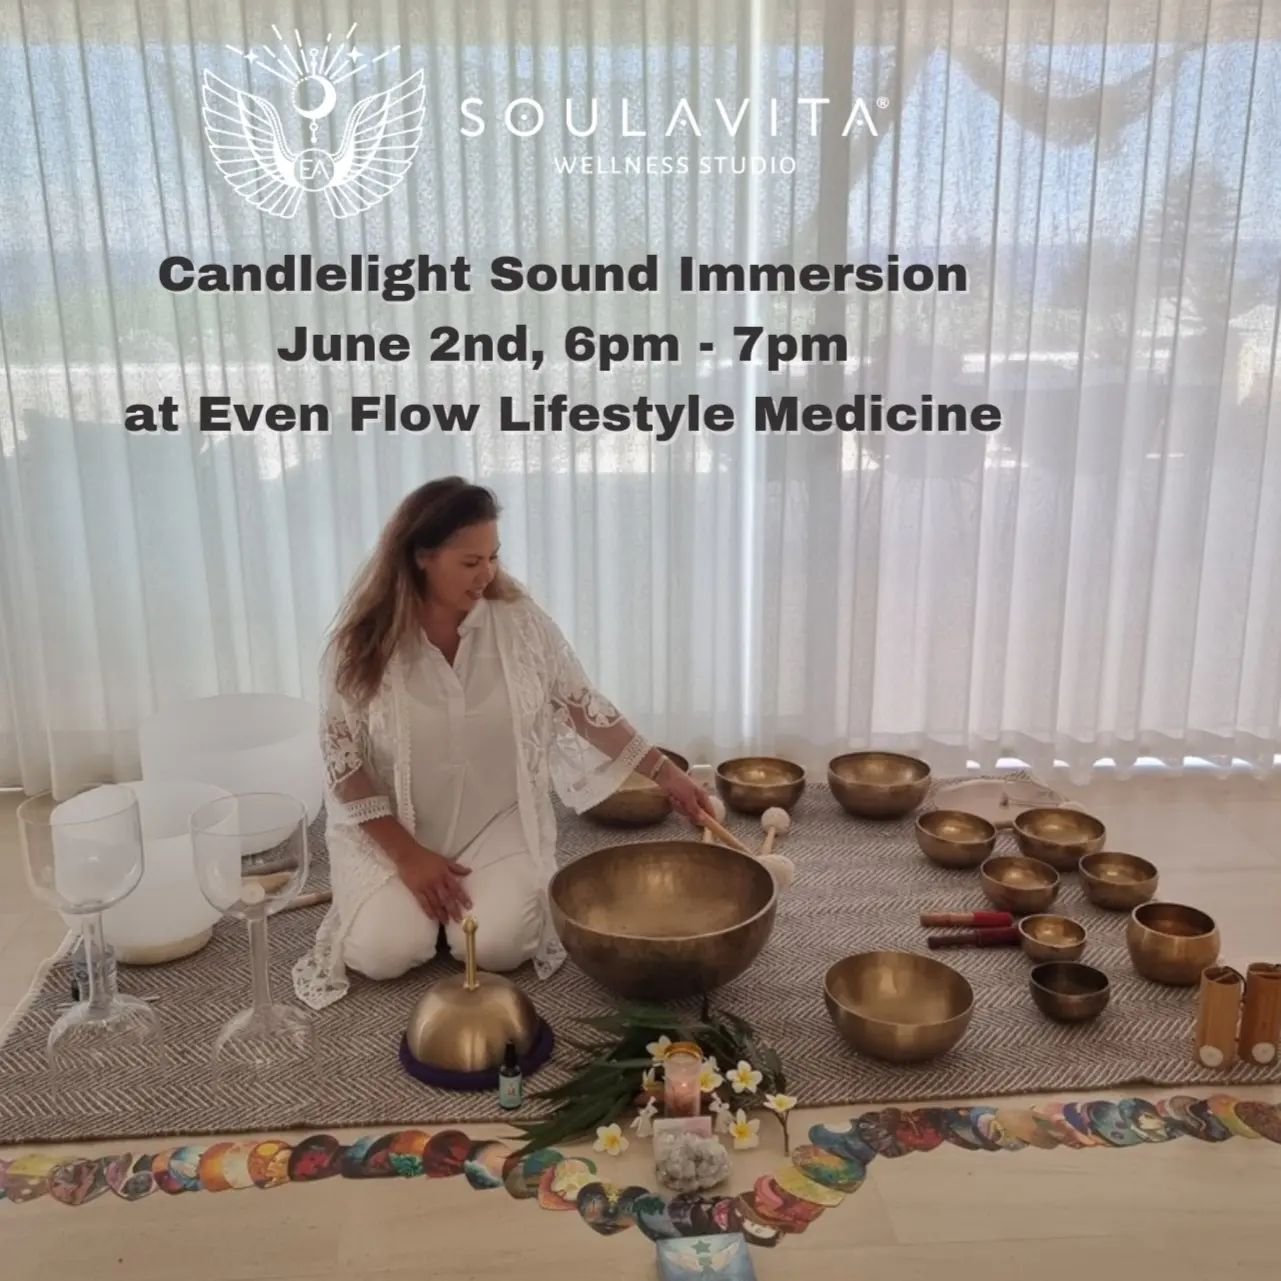 🌅Immerse into serenity and awaken your senses with Sunday Soothing Soulavita Soundscape!

Tune inwards, on a journey of tranquility every 1st Sunday of the month with our exquisite Soulavita sound healing. Join Estelle Amelia as YOU sonically immers